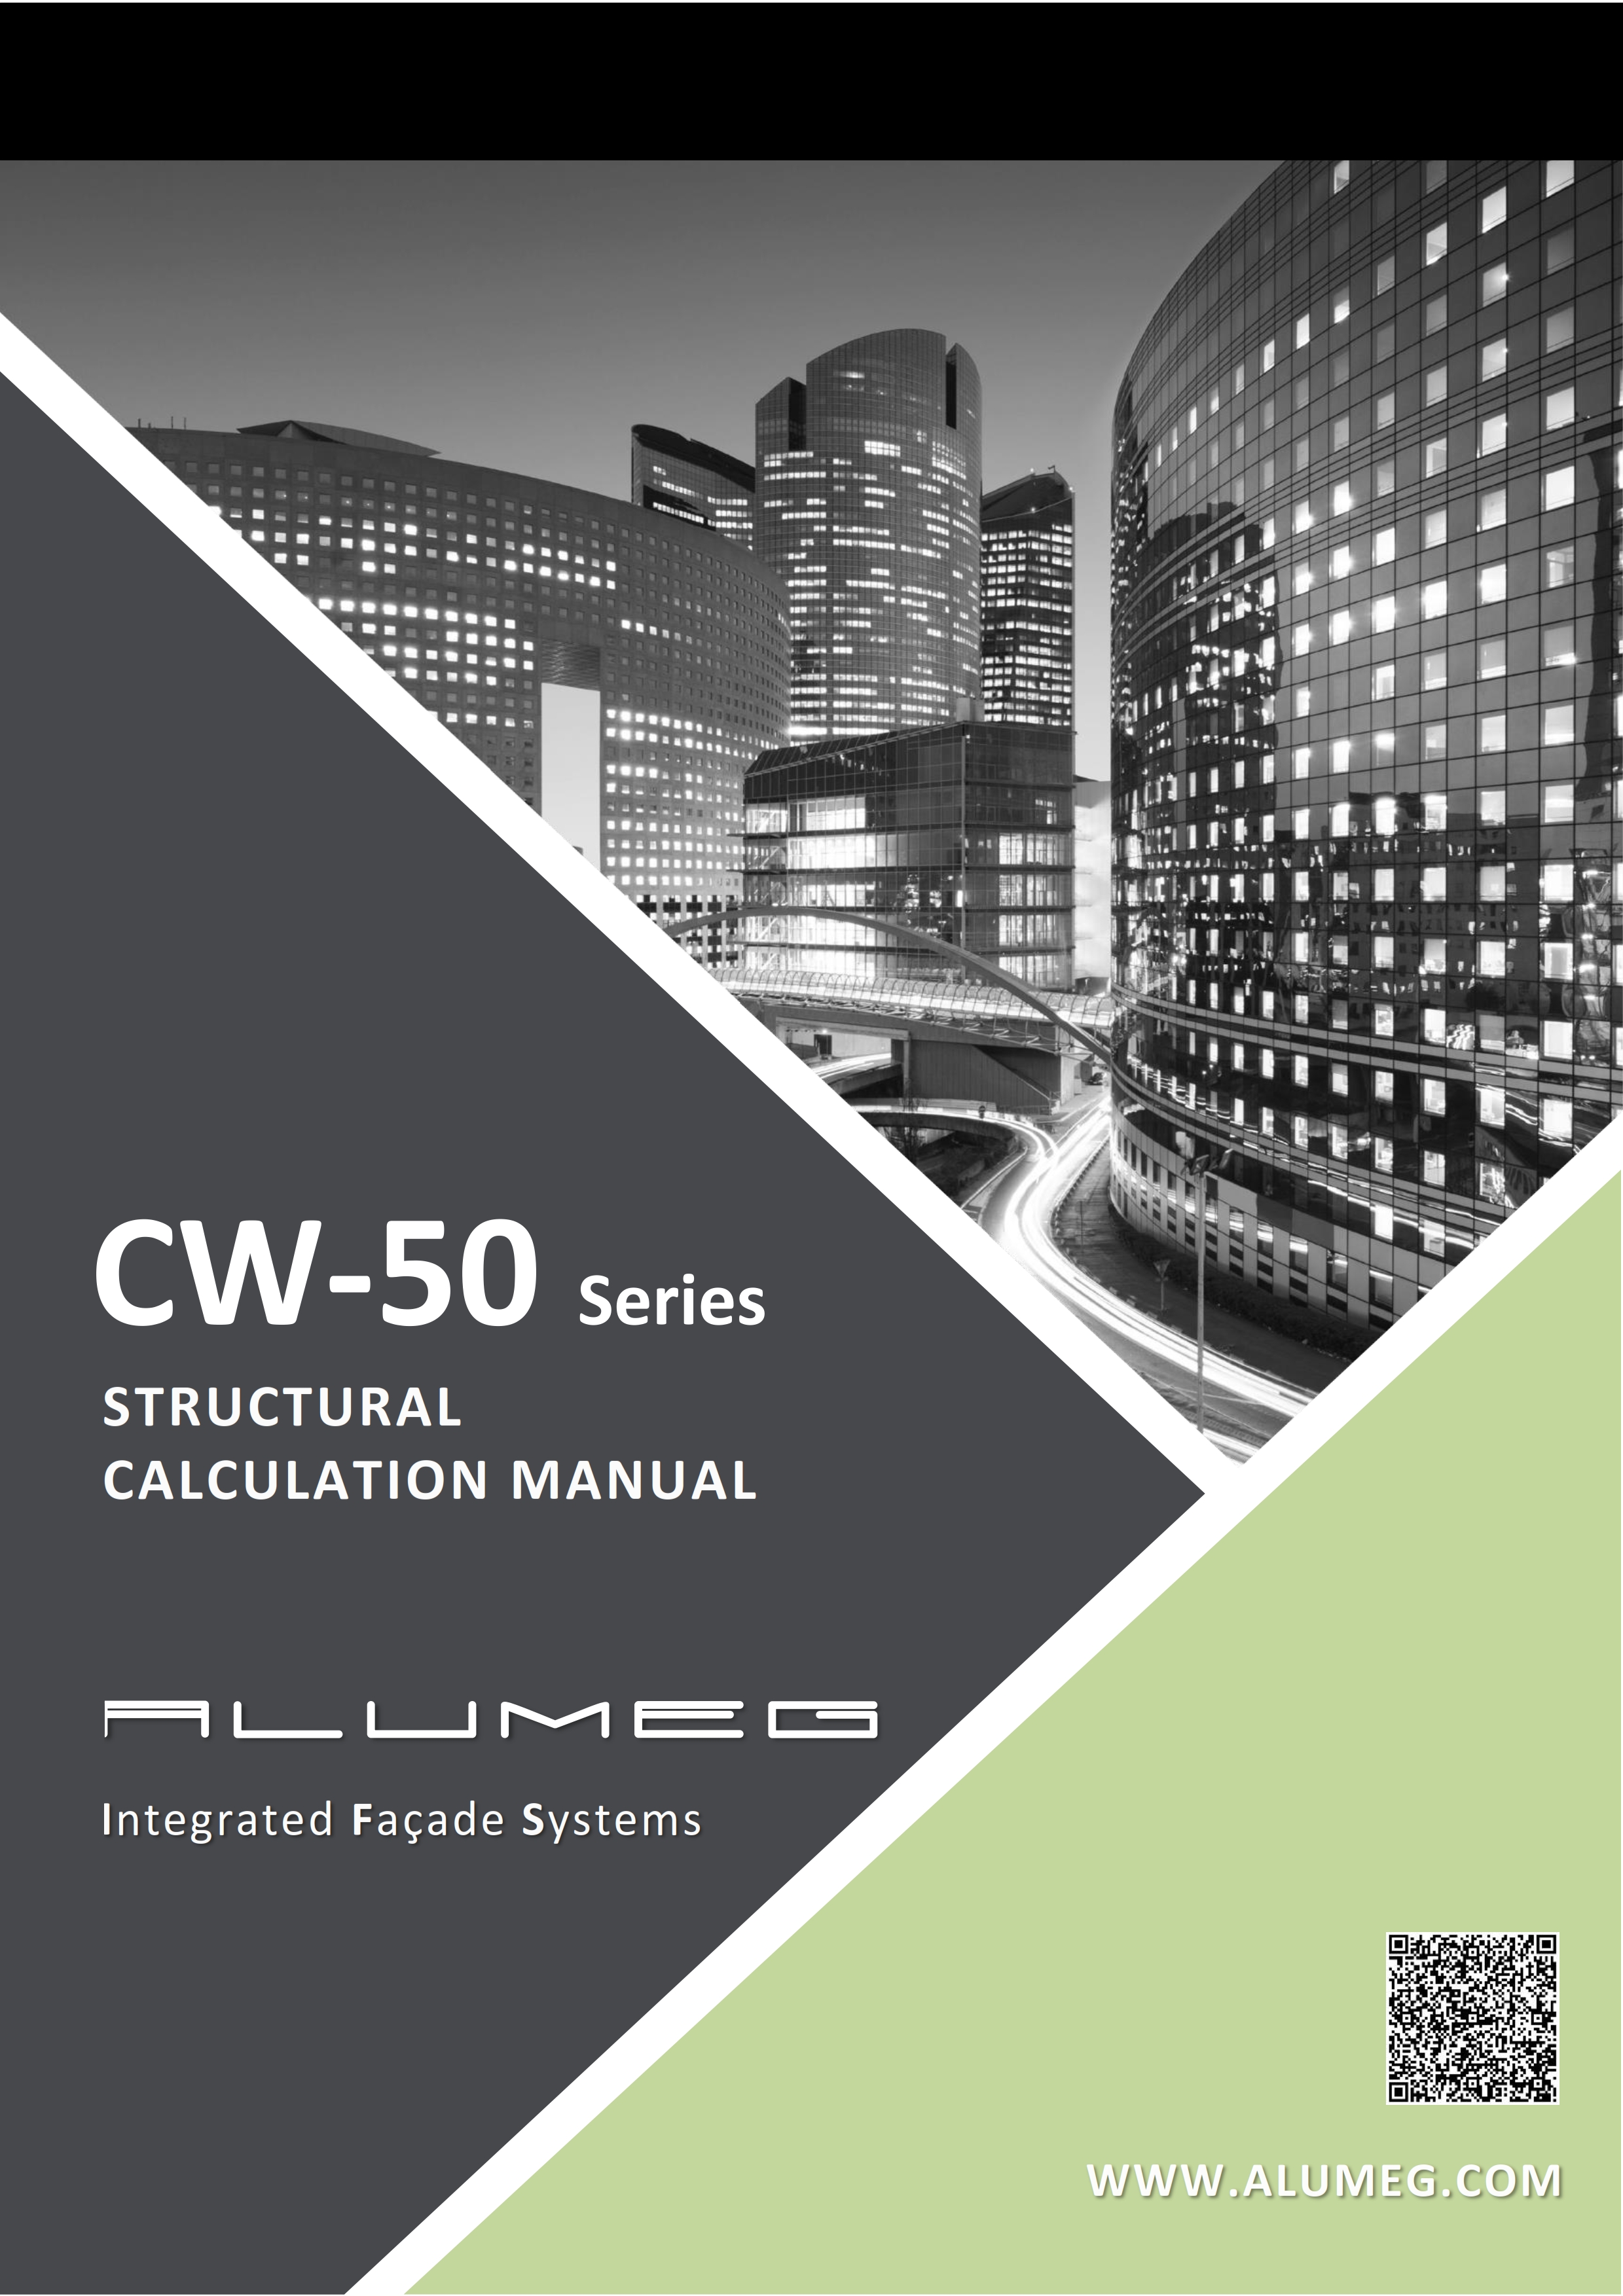 CW-50 STRUCTURAL CACULATION